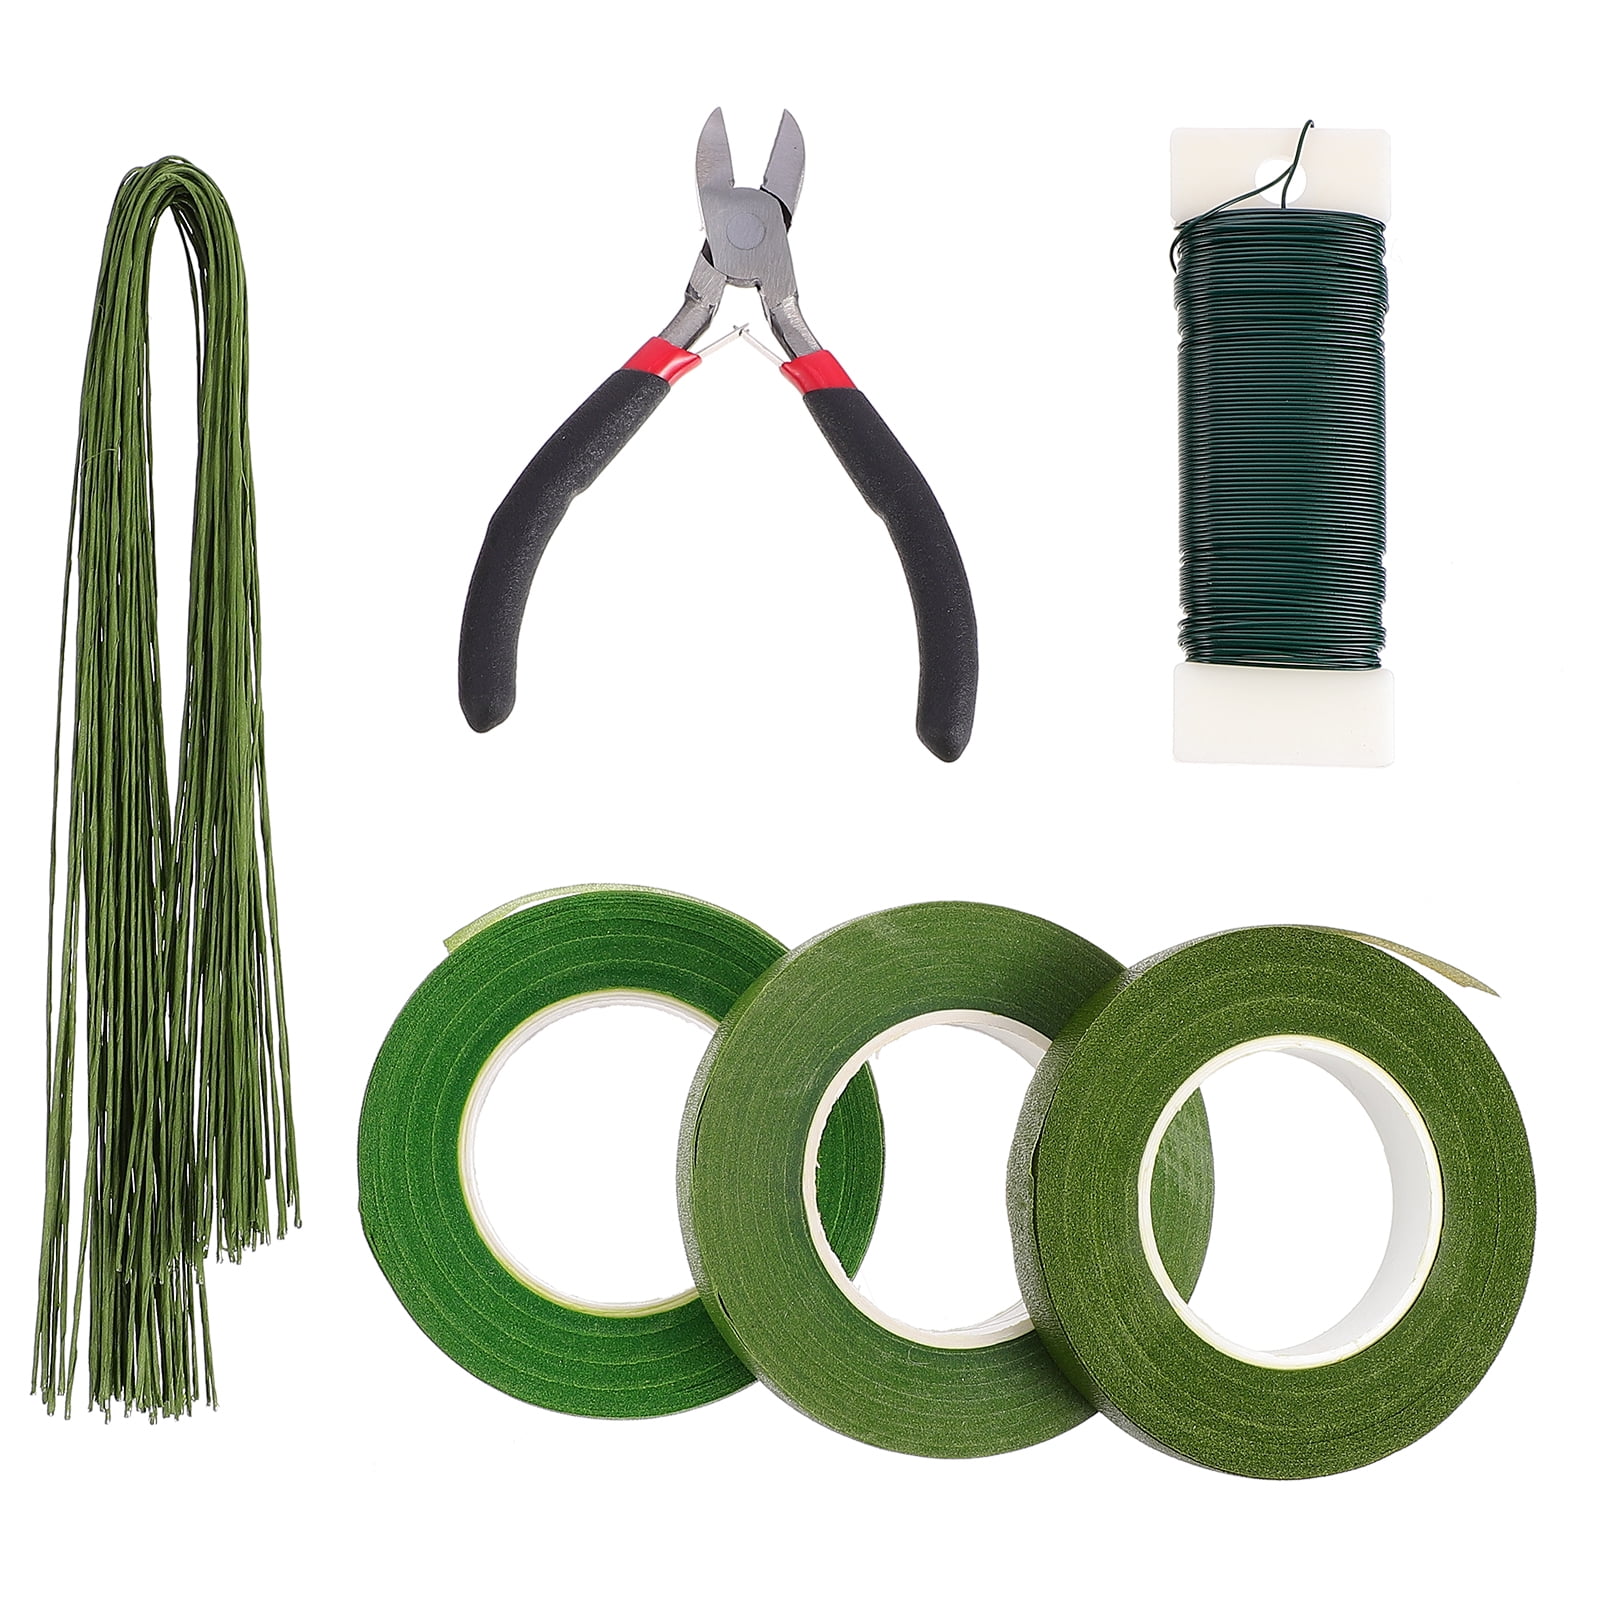 Wire Cutters for Floral Arranging 